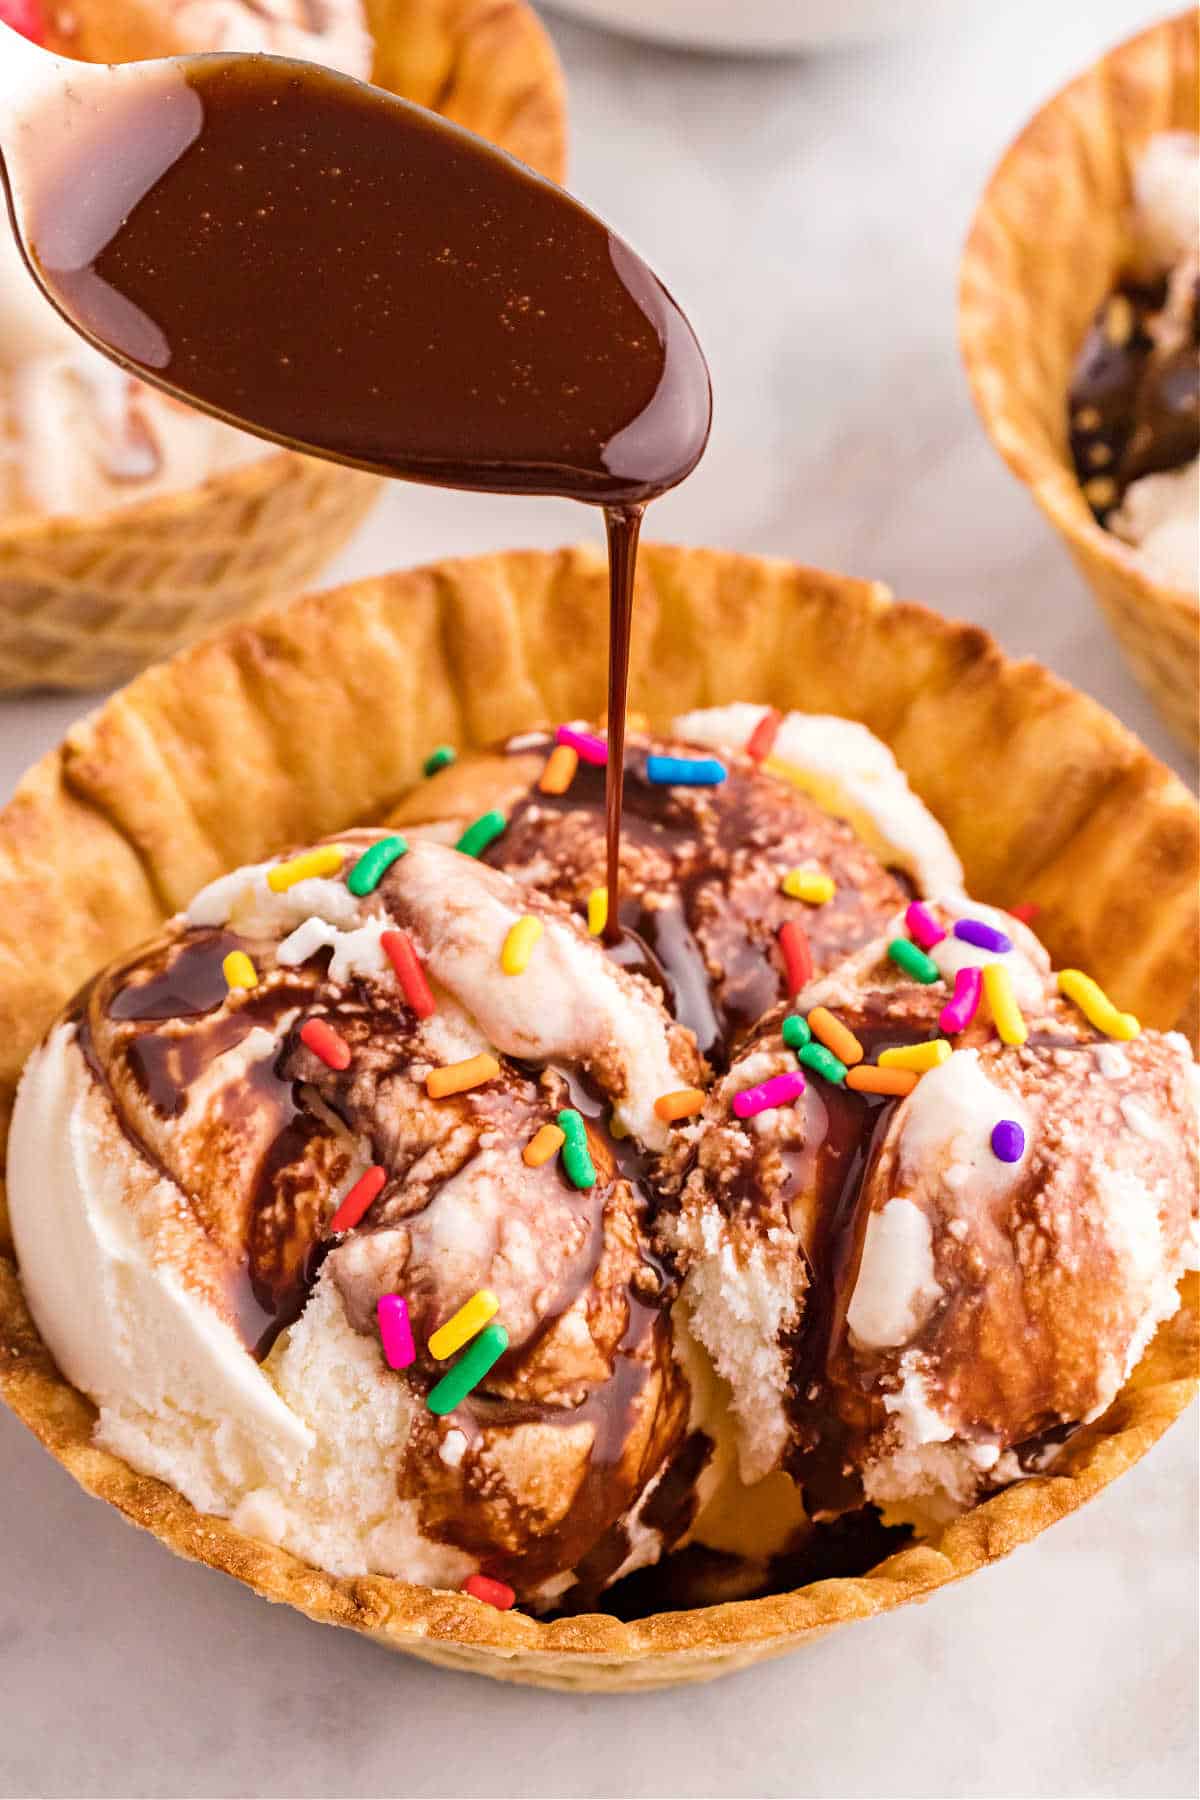 Chocolate syrup being drizzled over a waffle bowl of vanilla ice cream.